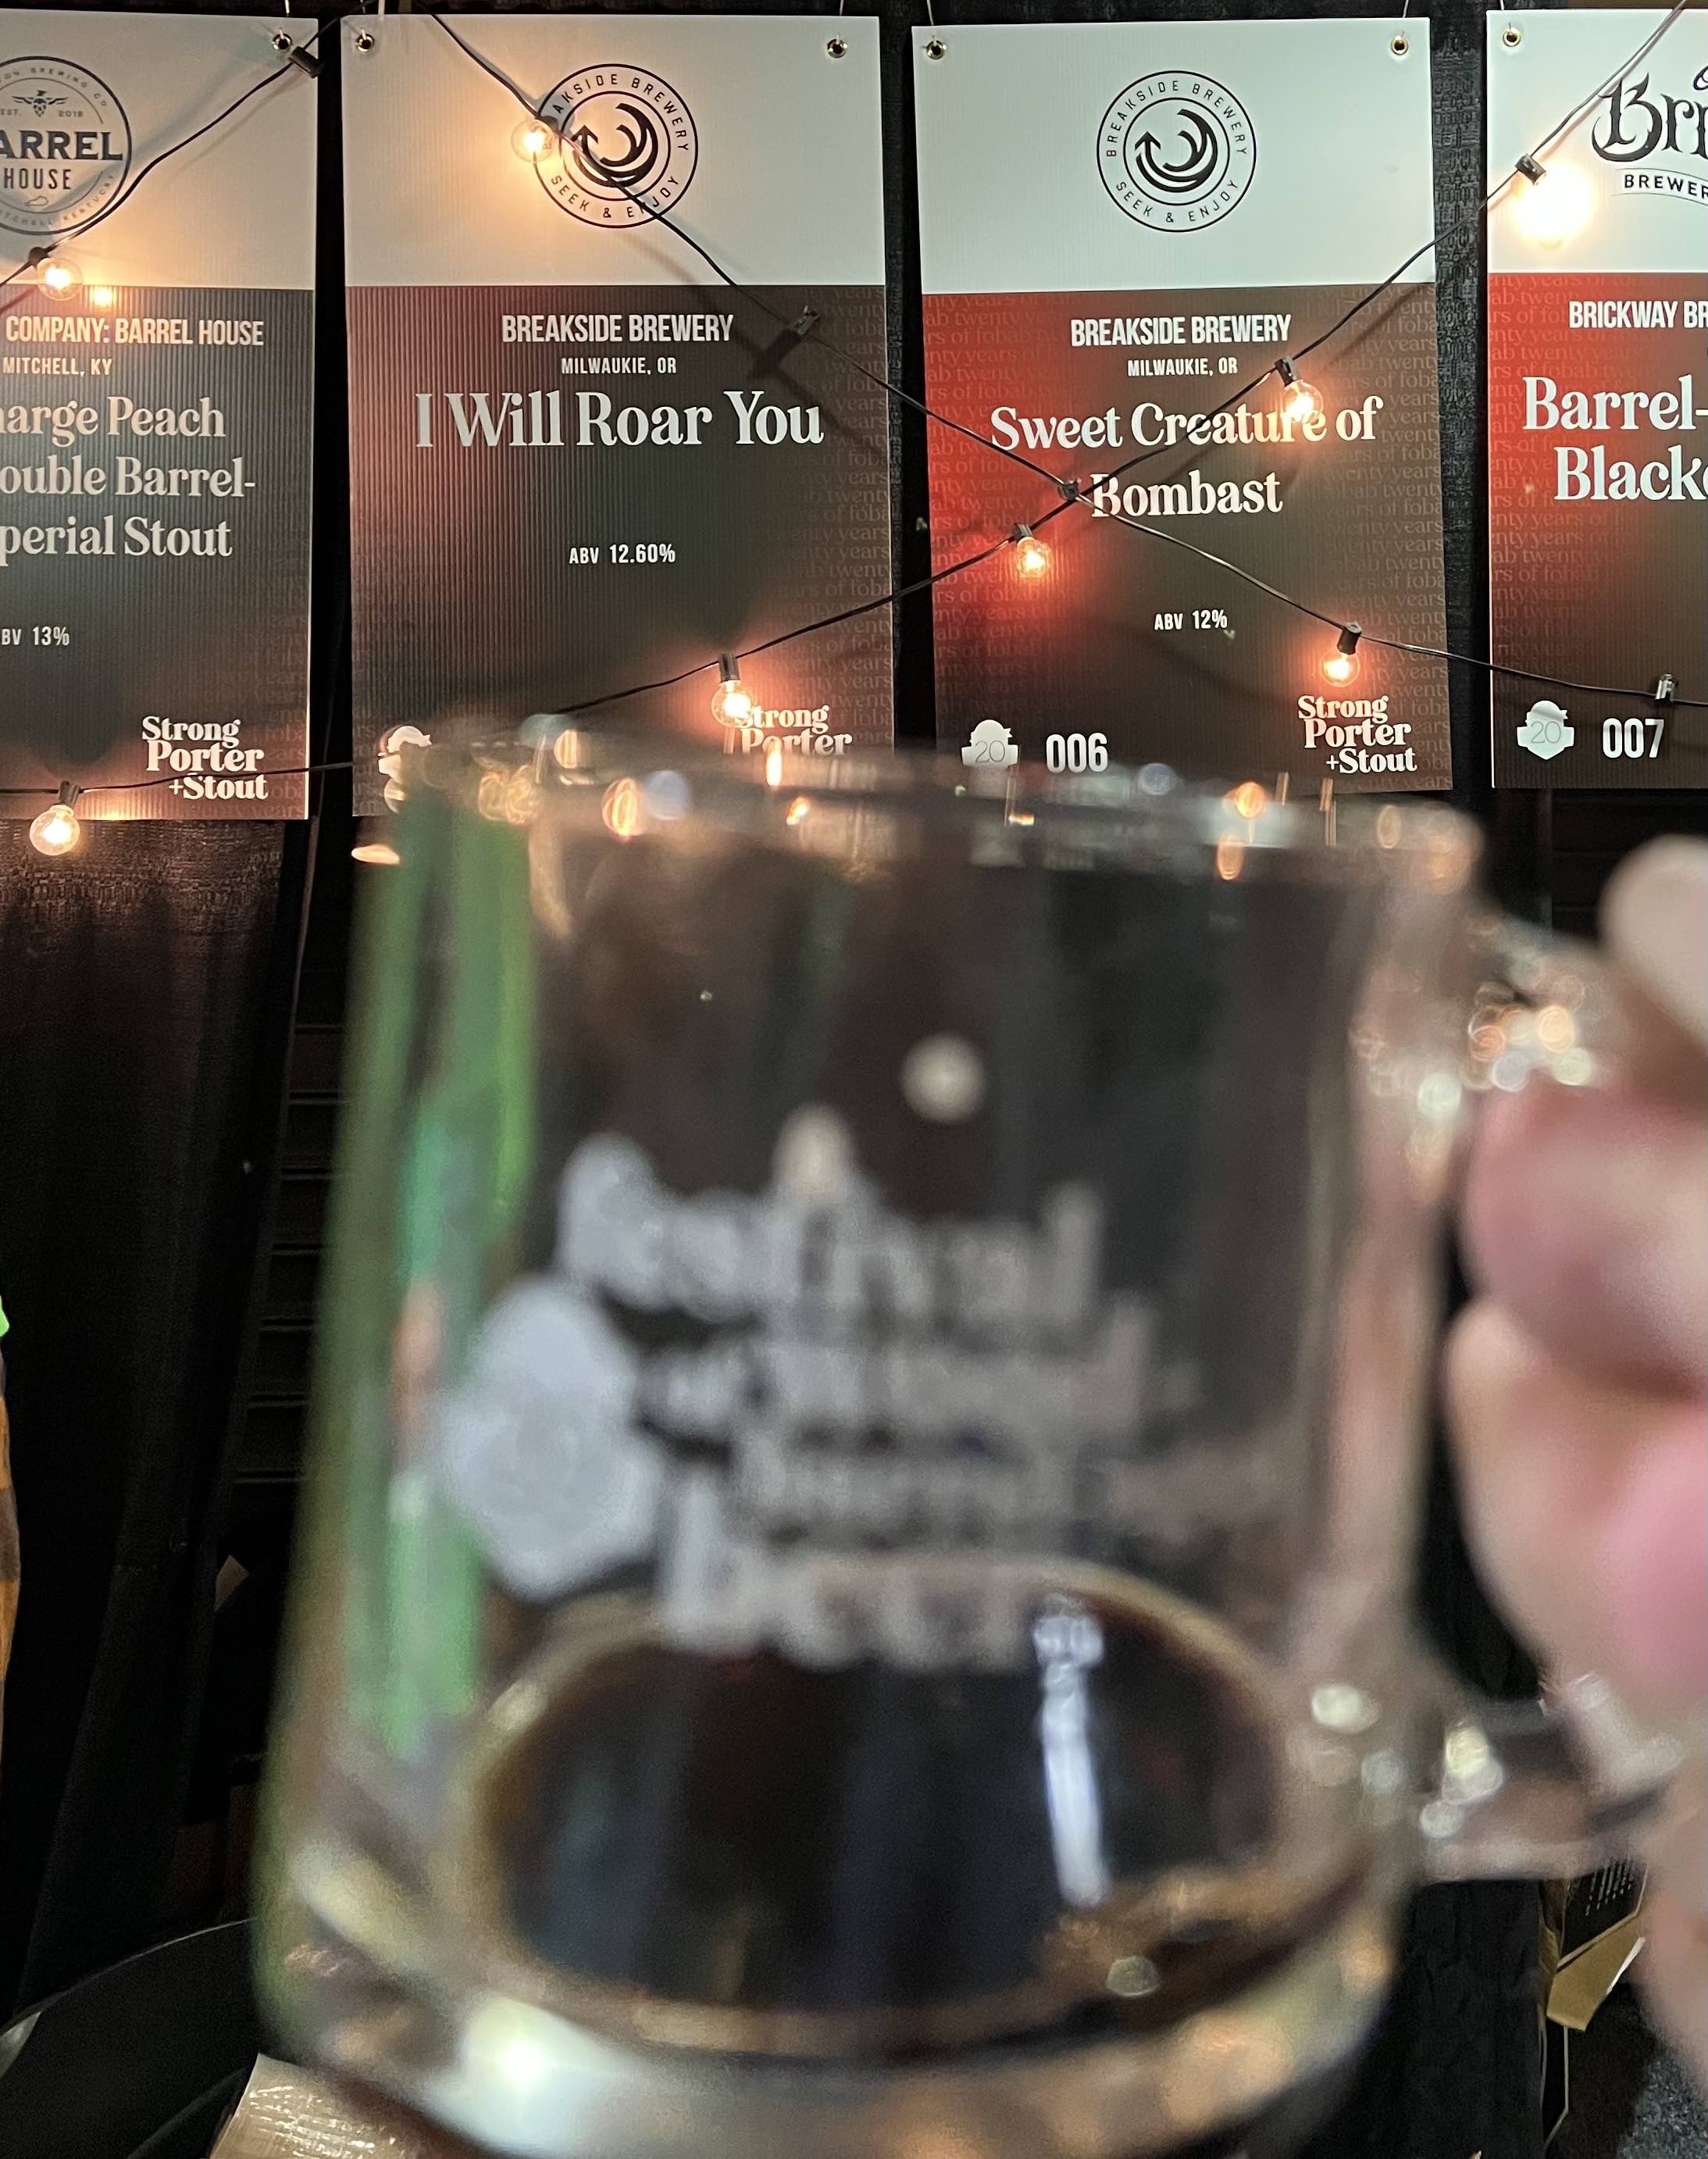 I Will Roar You and Sweet Creature of Bombast from Breakside Brewery were on tap at the 2022 Festival of Wood and Barrel-Aged Beer in Chicago, Illinois on November 4-5, 2022.